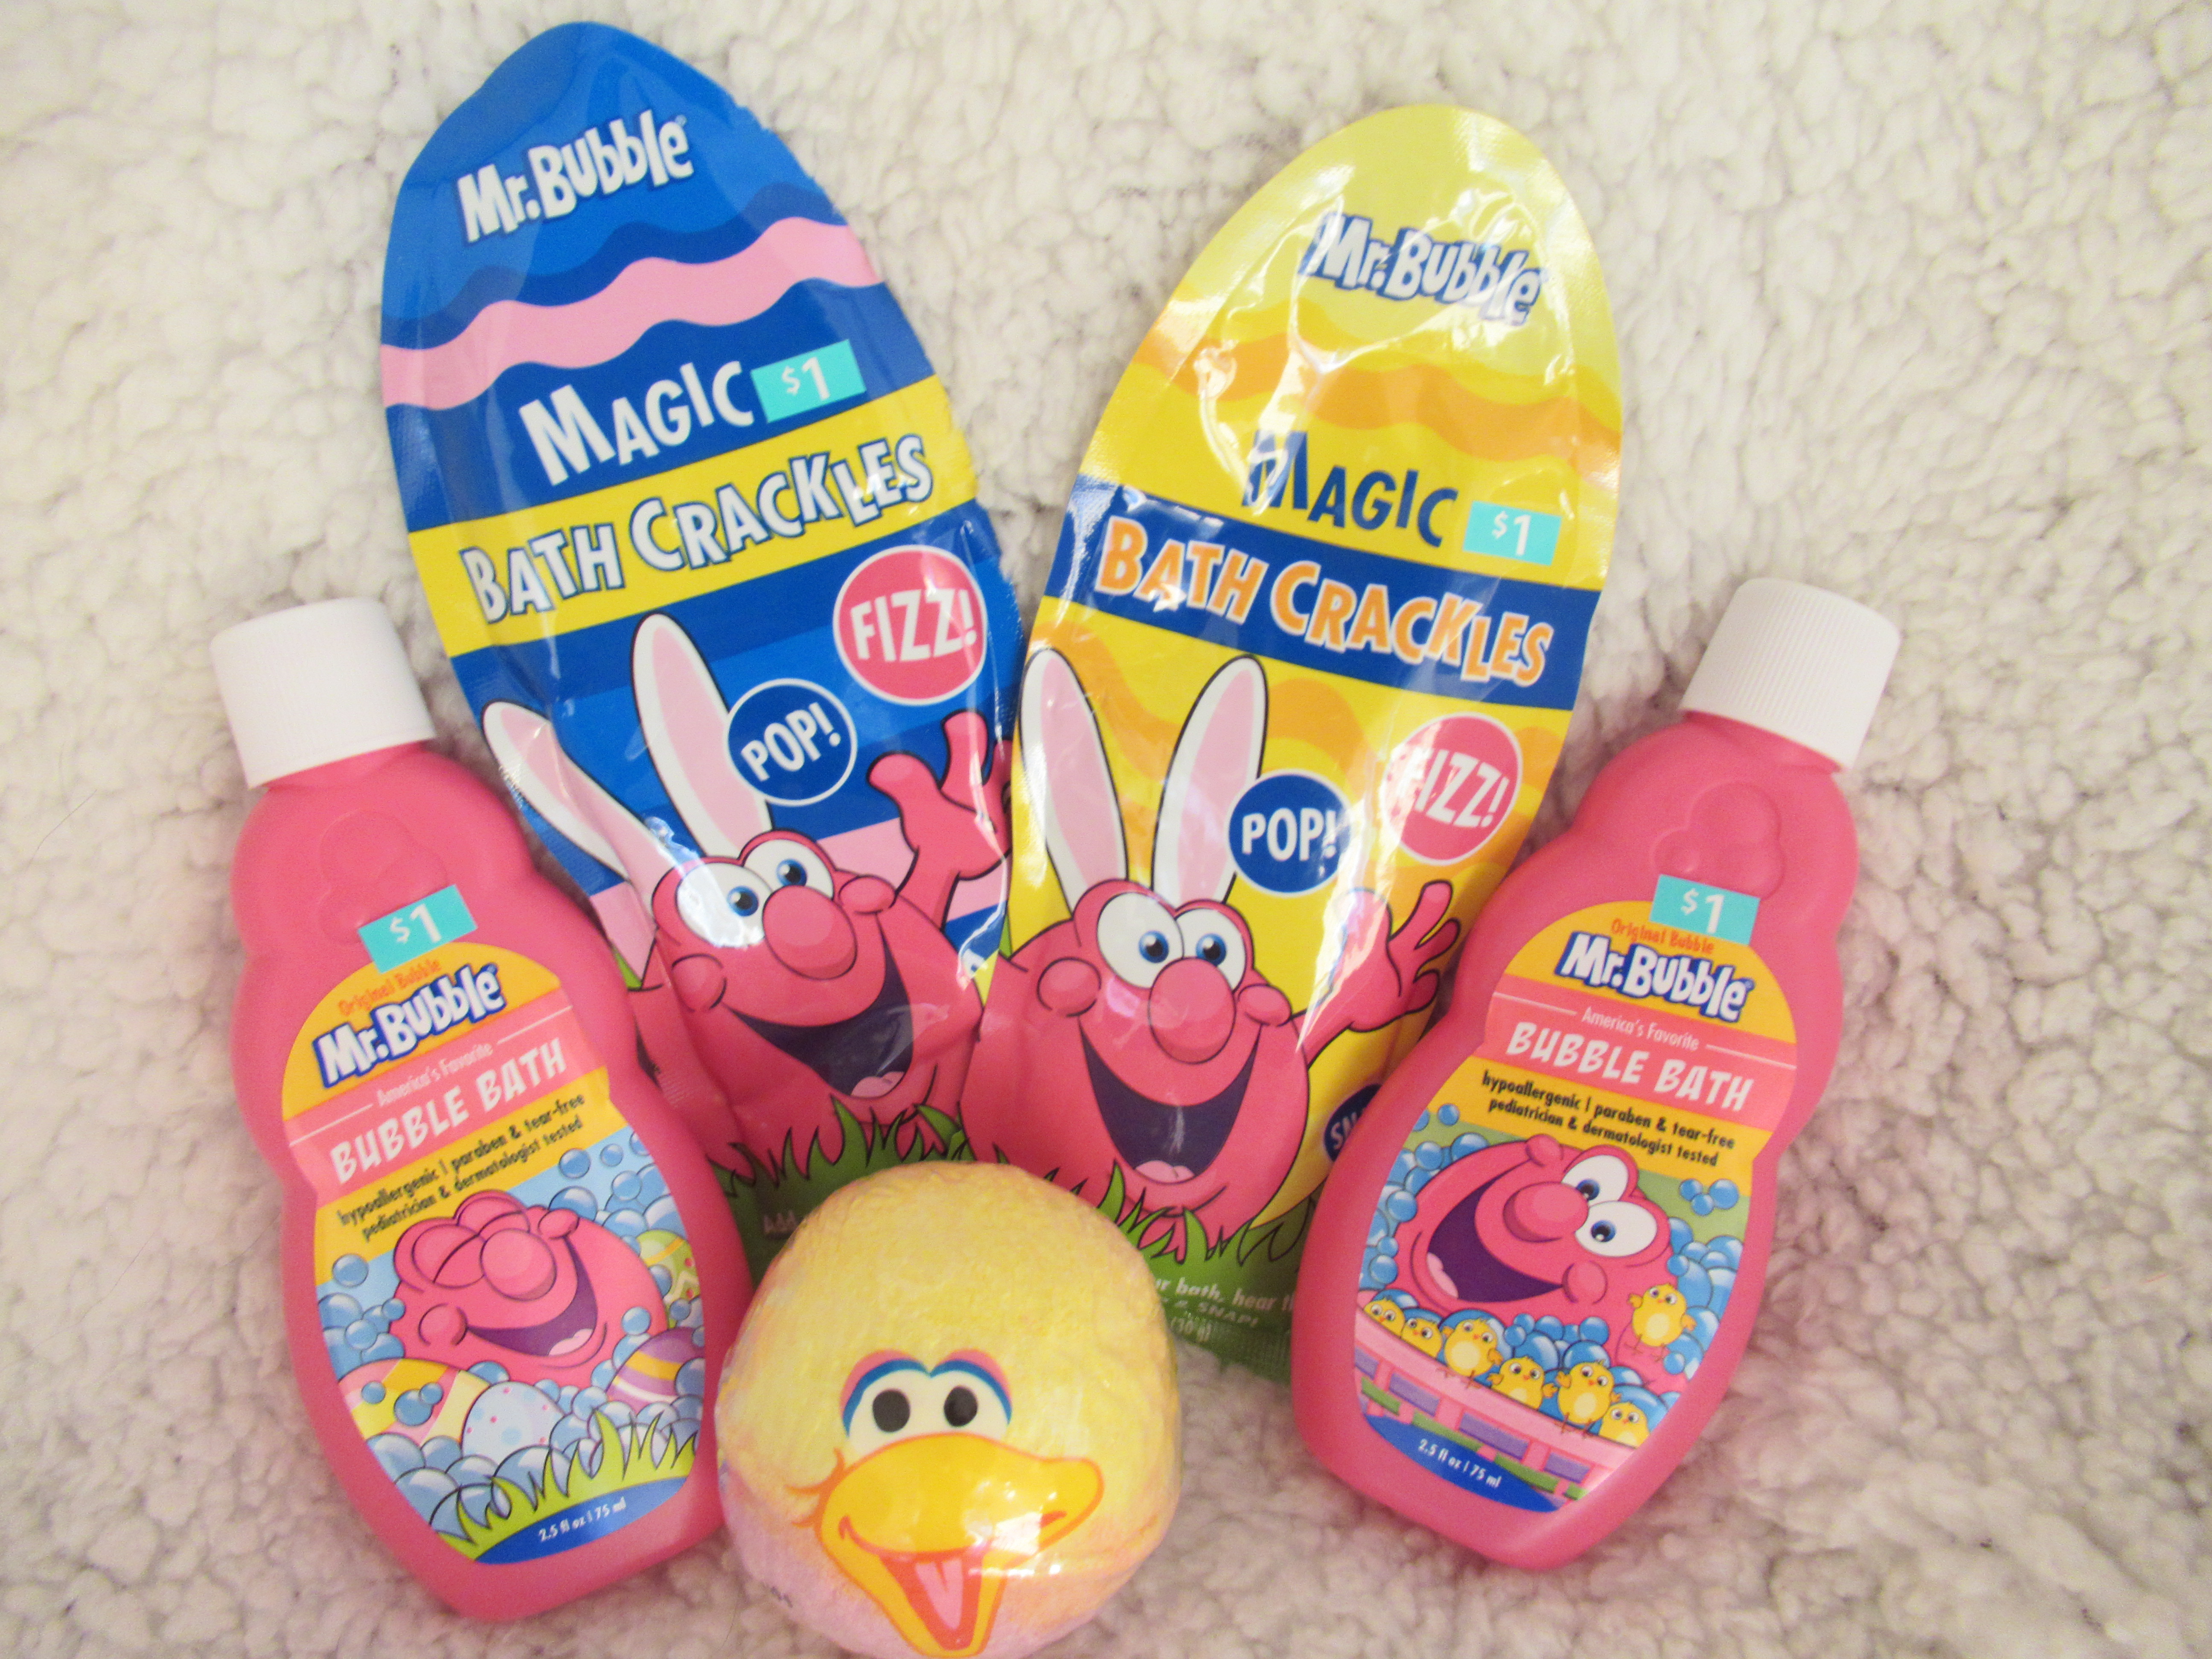 Squeaky Clean Fun for Easter from Mr. Bubble + Mr. Bubble Prize Pack  #Giveaway - Mommy's Block Party